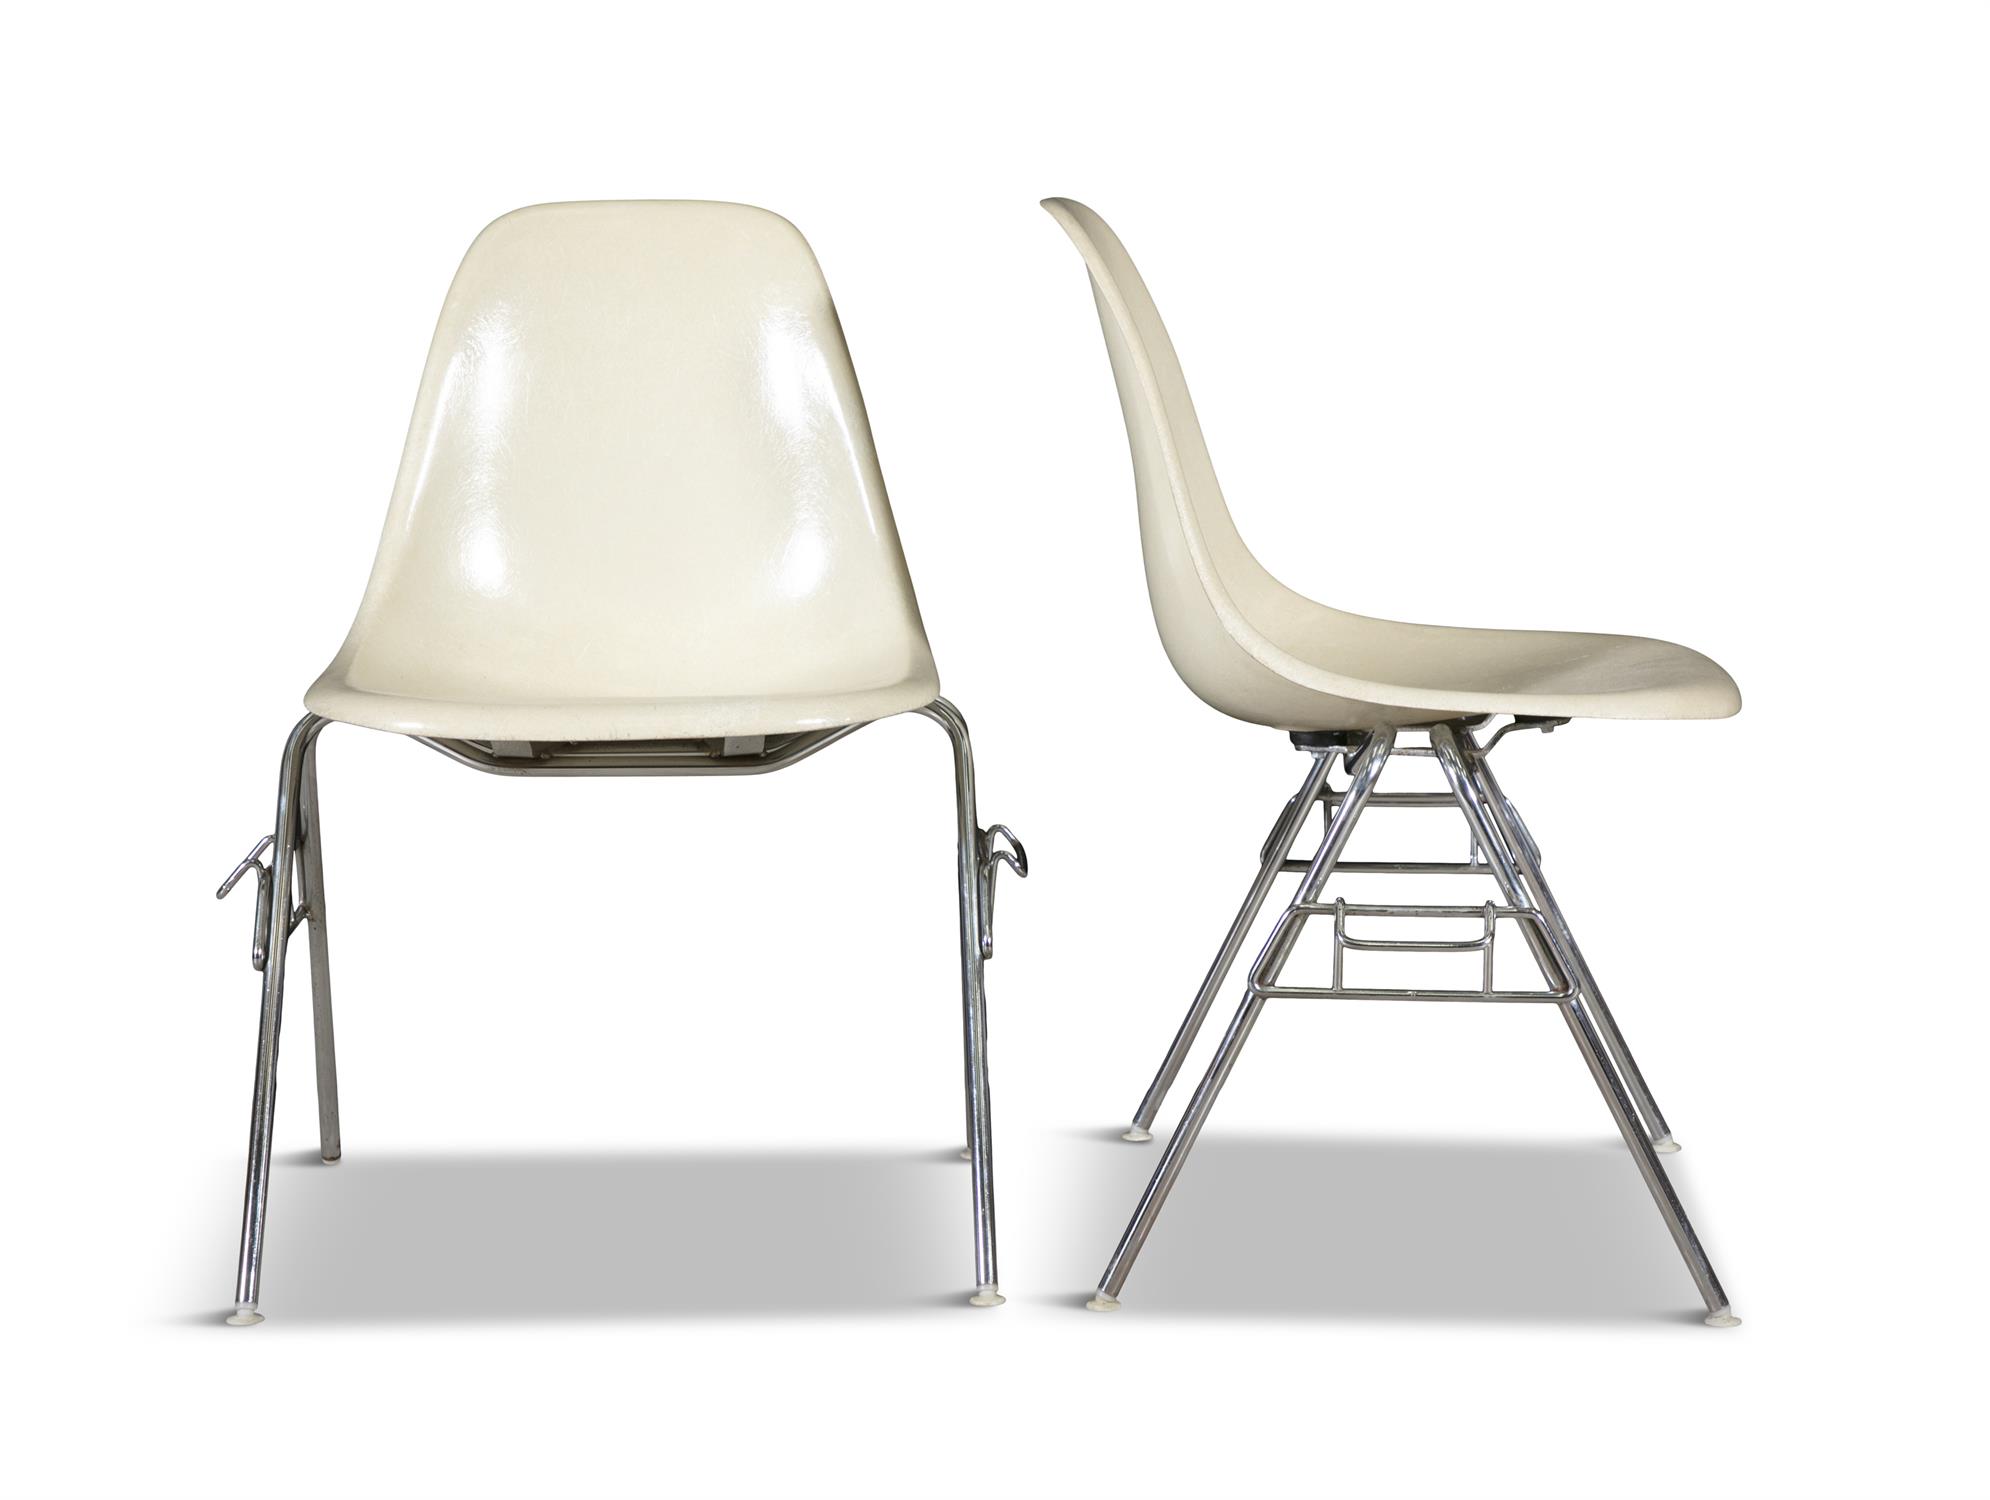 HERMAN MILLER A set of four Shell chairs by Herman Miller on chrome bases with maker's stamp. - Image 5 of 6